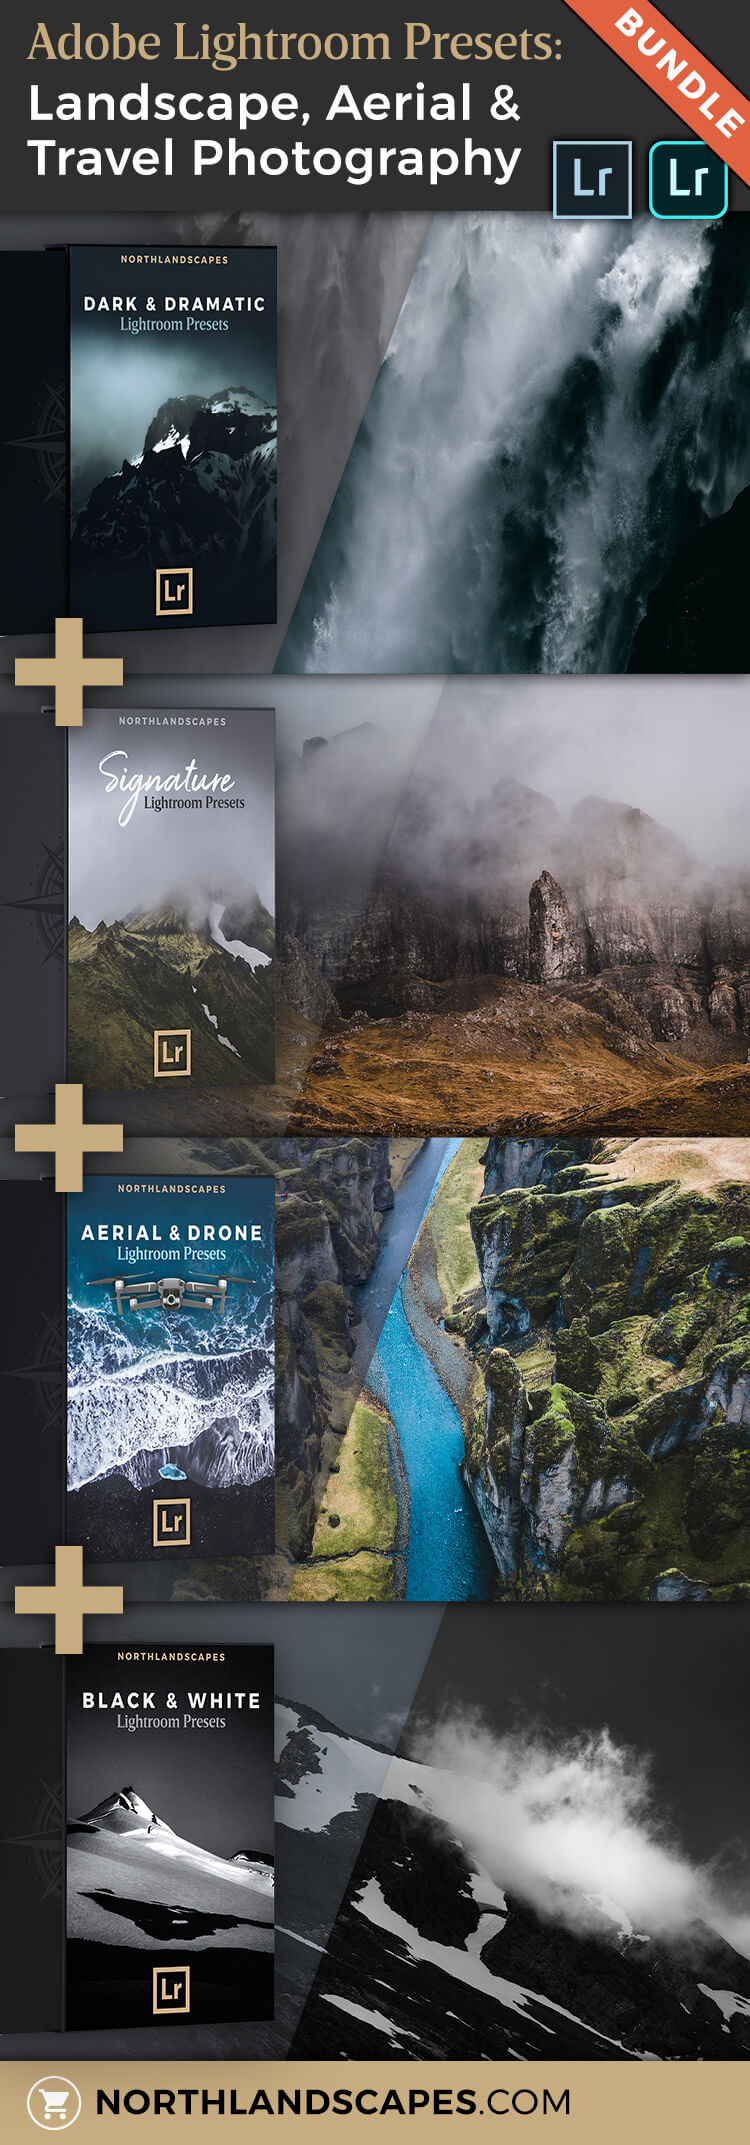 The Best Lightroom Presets Bundle for Landscape, Aerial & Travel Photography + Future Product Releases